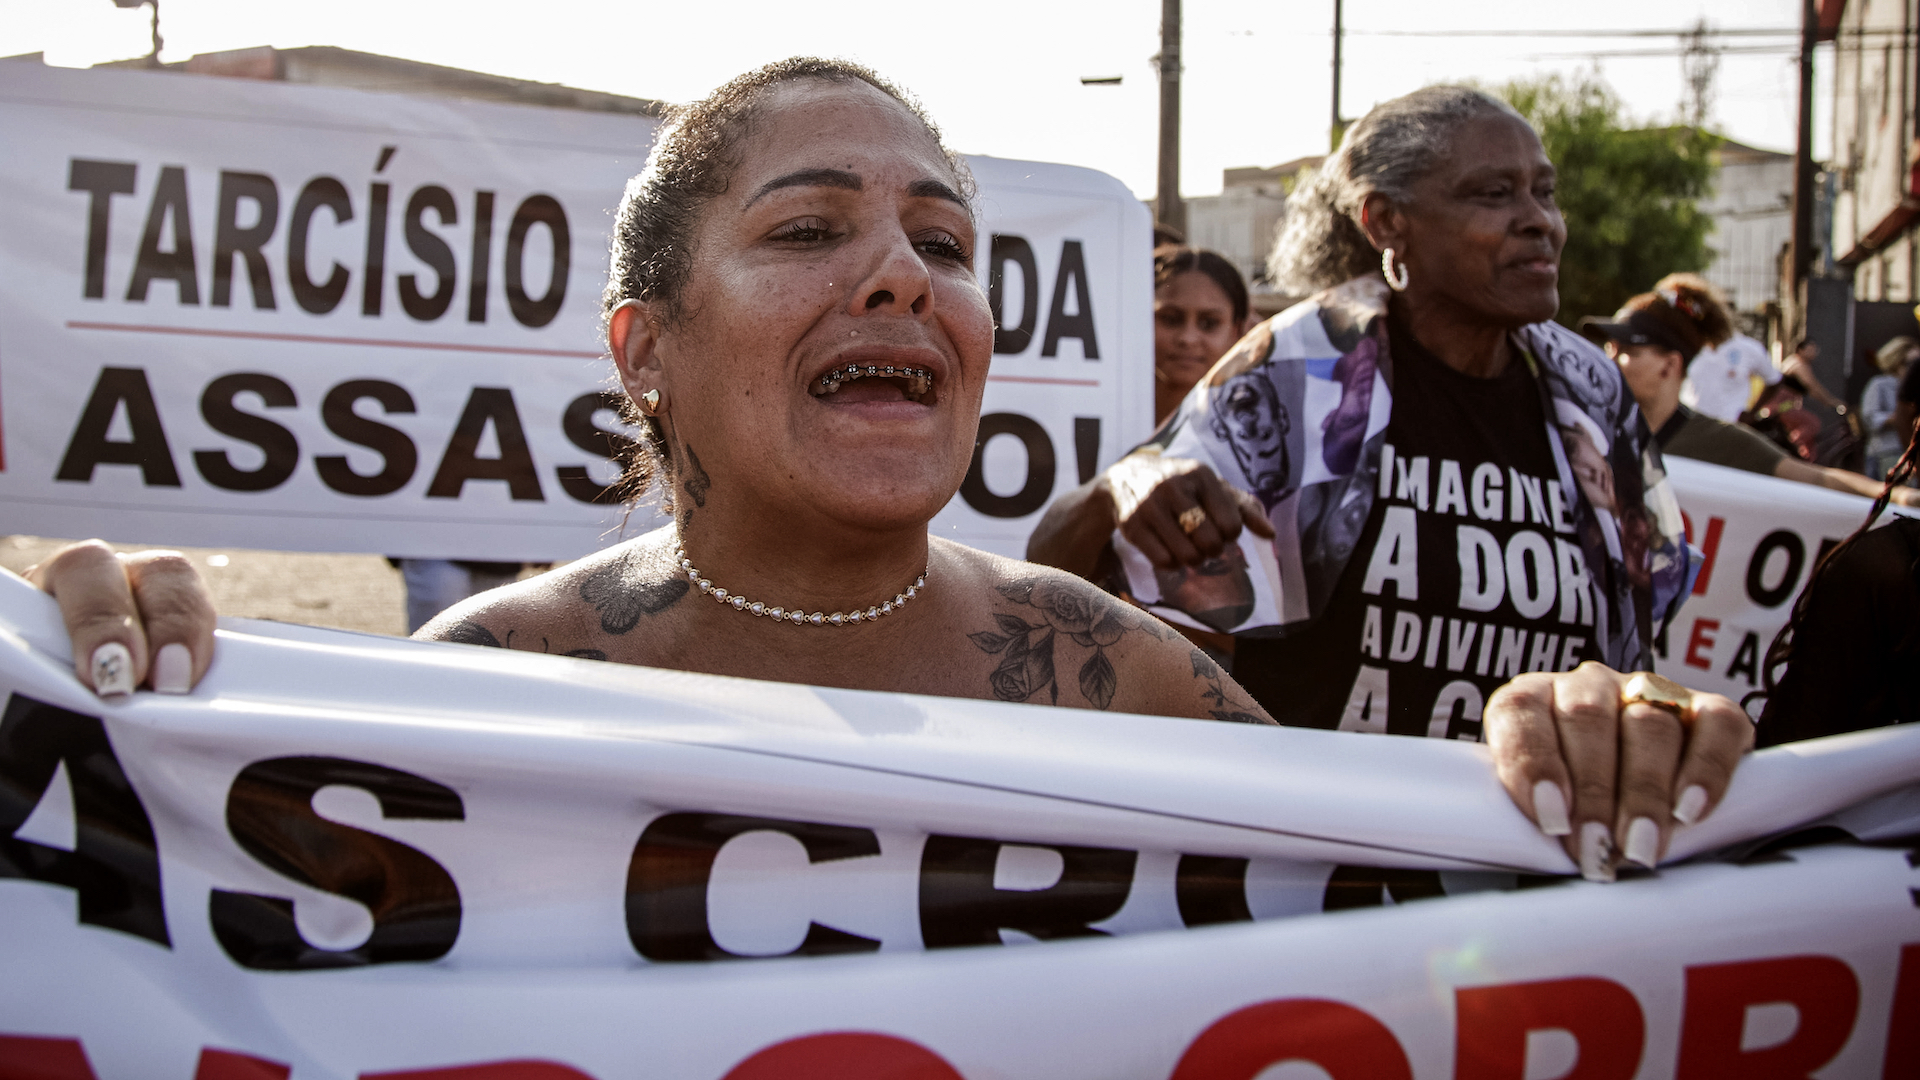 The world in brief: Brazil police raid leaves 8 people dead